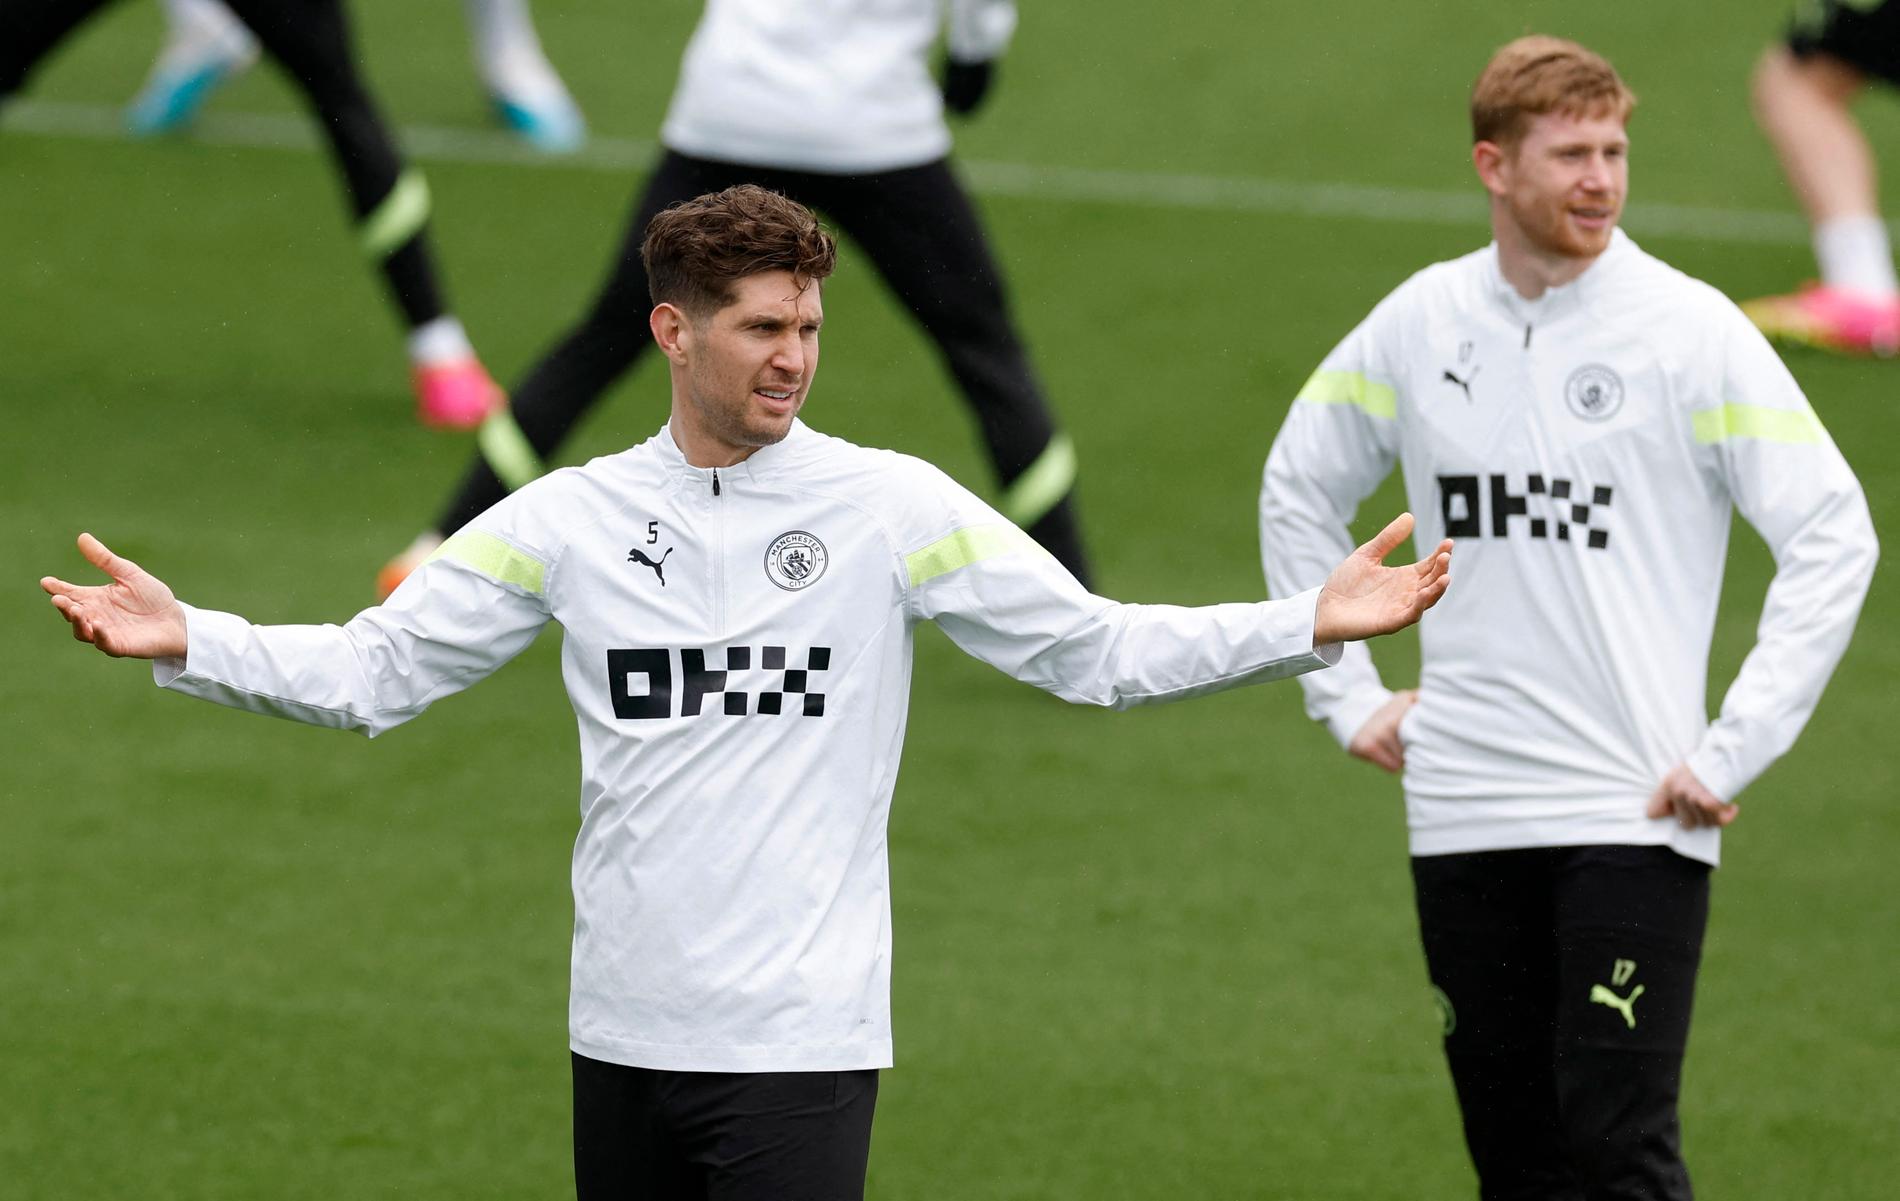 Important but not available: John Stones and Manchester City's Kevin De Bruyne, pictured here during a training session last season.